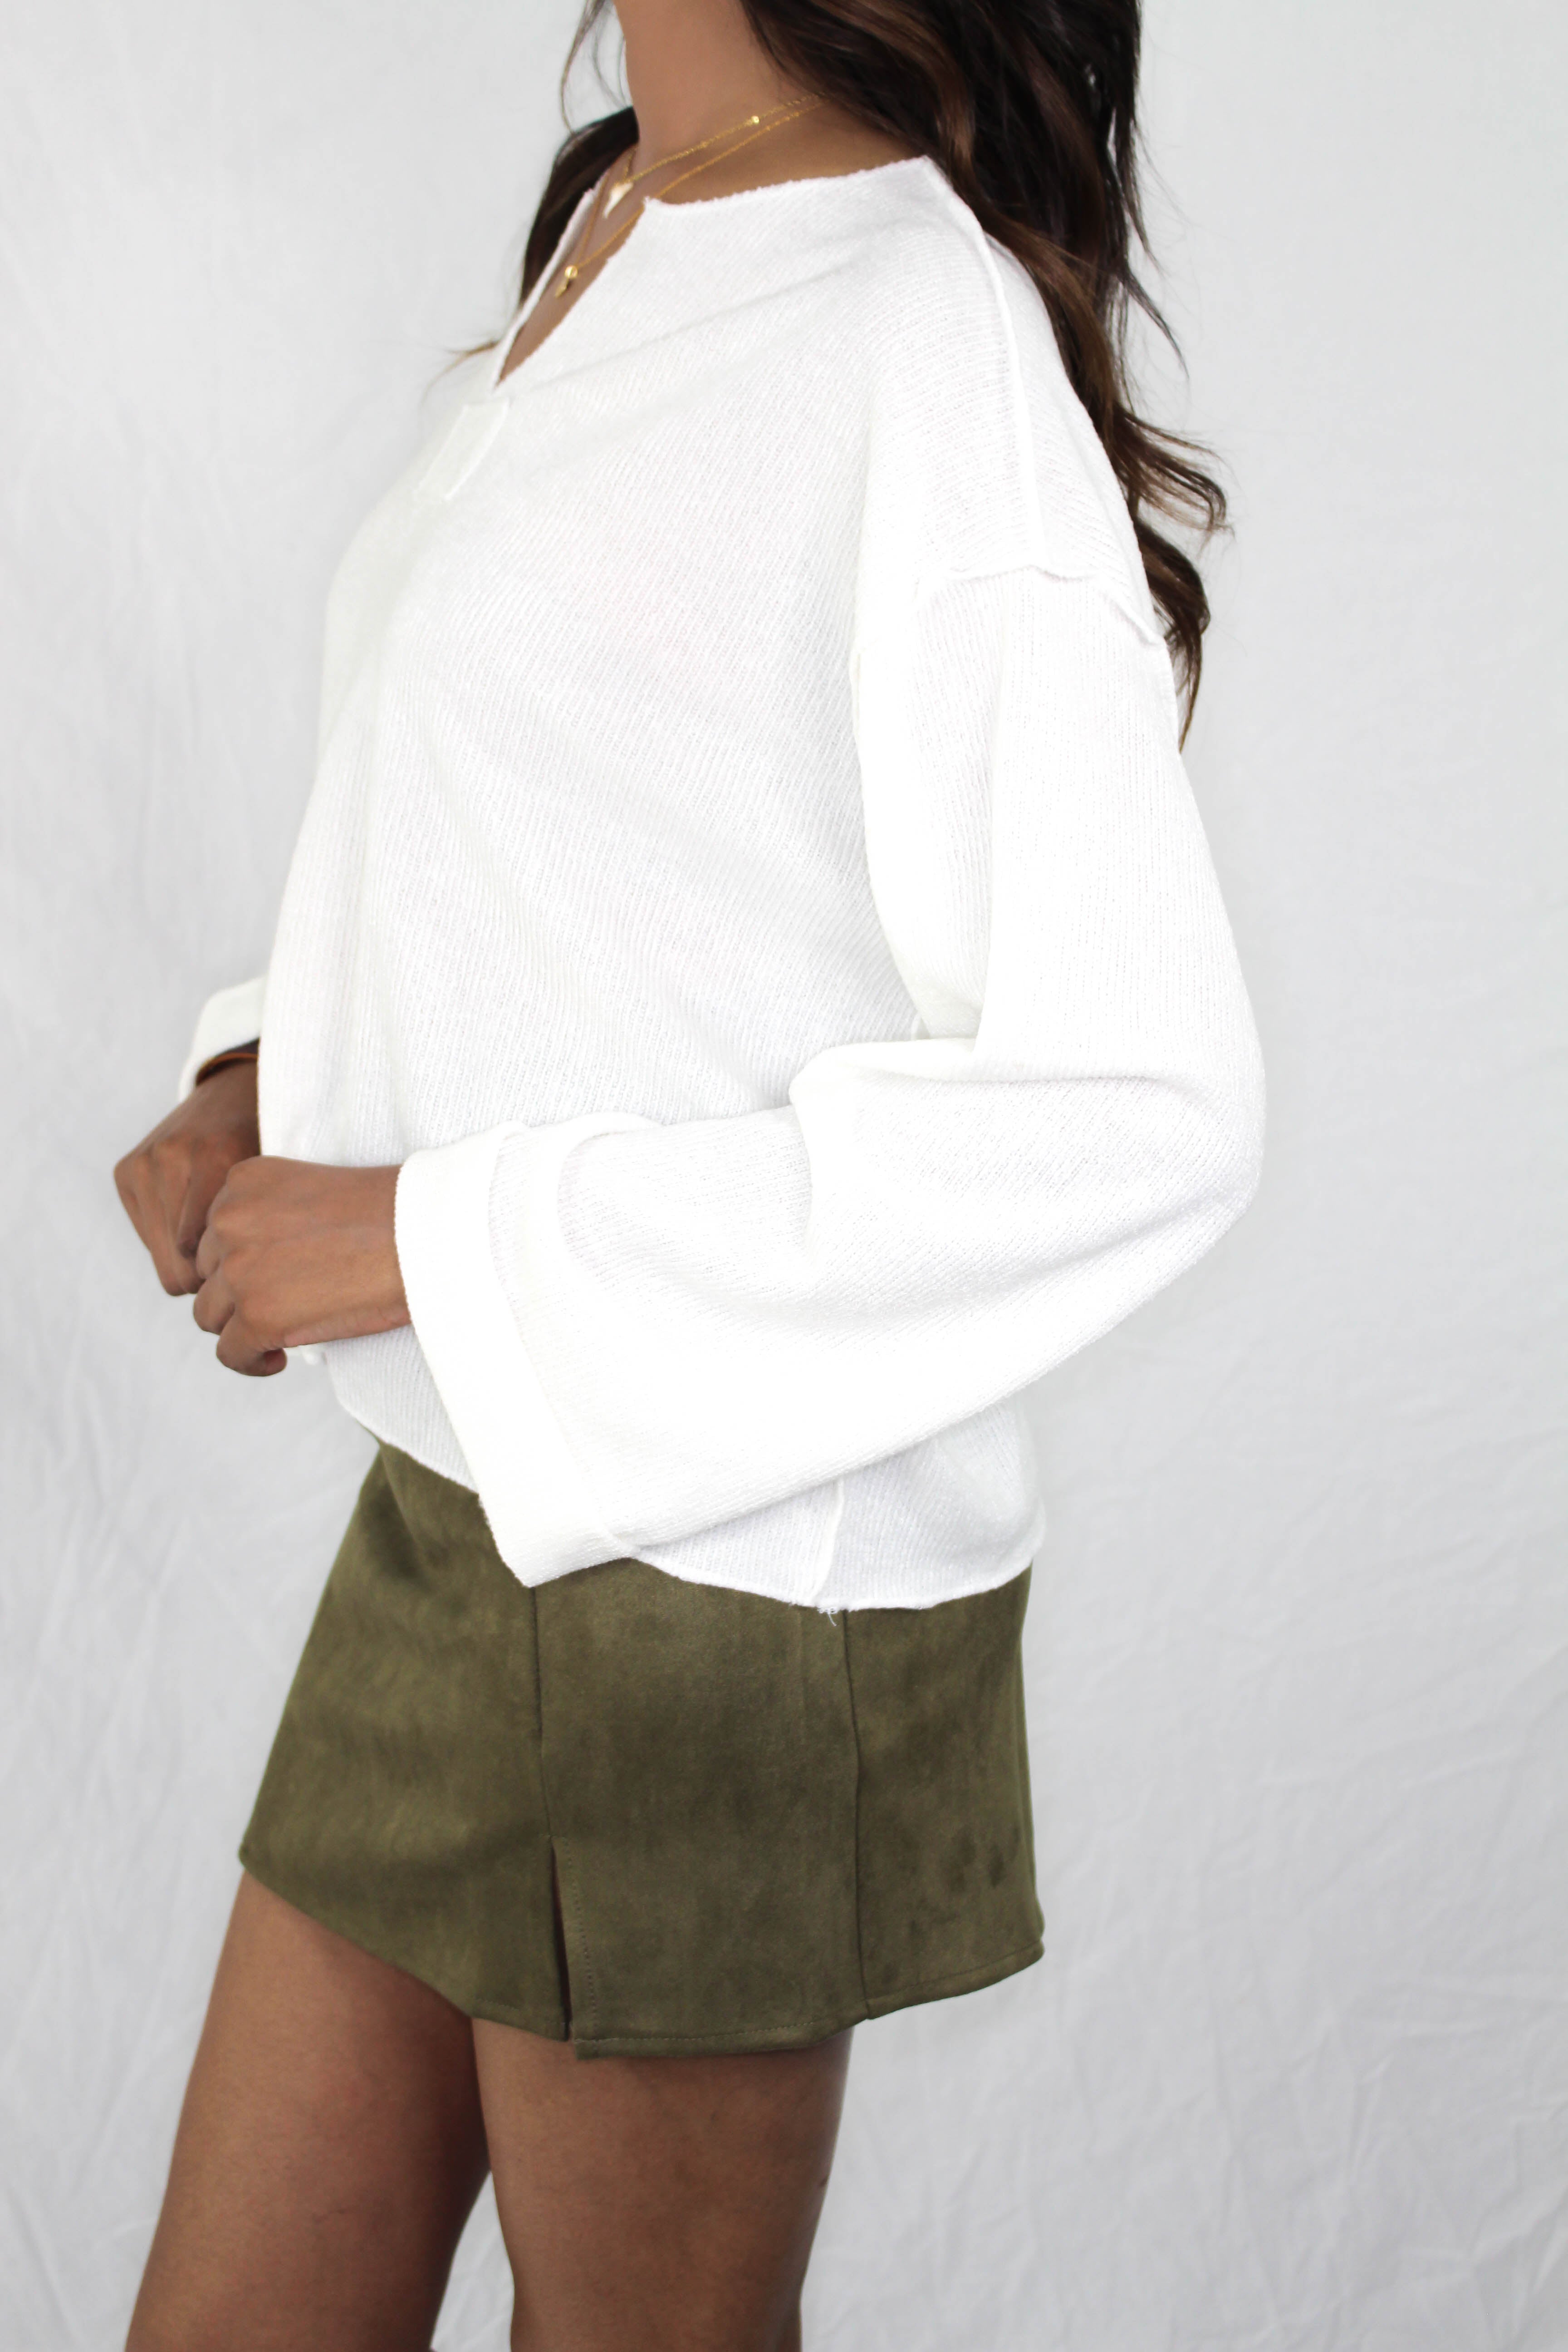 Colburn Faux Suede Skirt in Olive